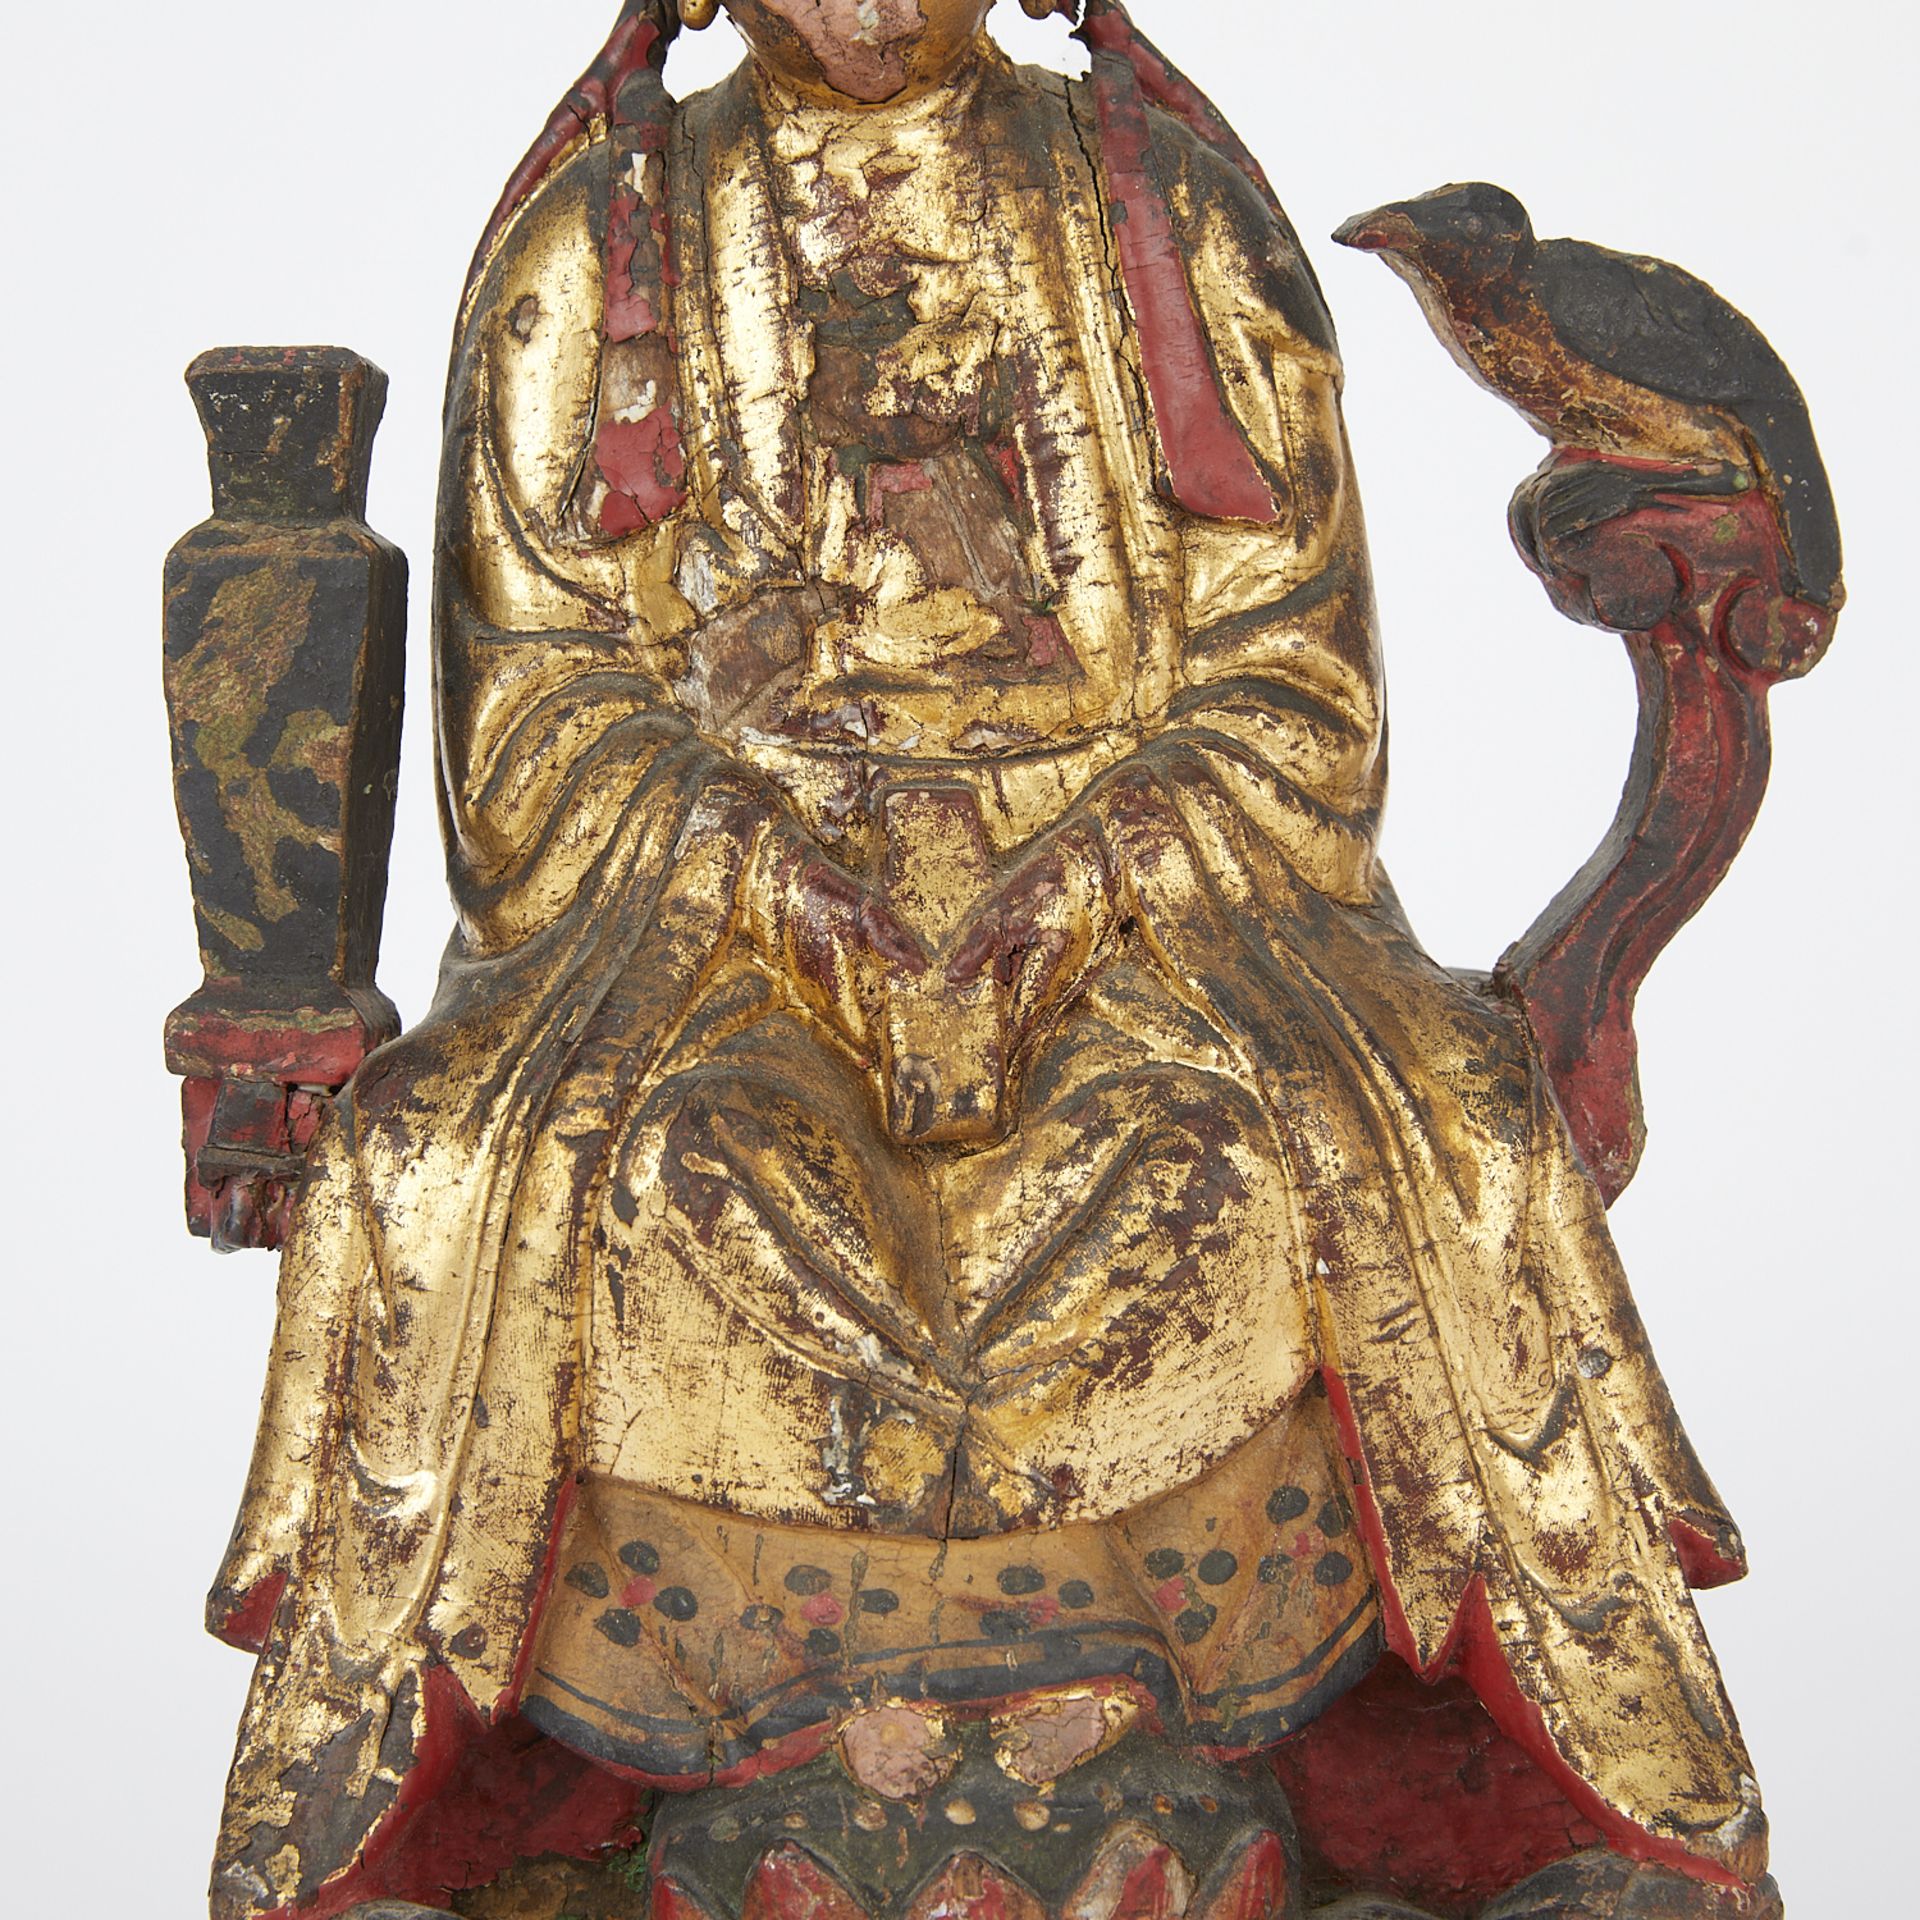 18th-19th c. Chinese Gilt Wooden Guanyin - Image 8 of 9